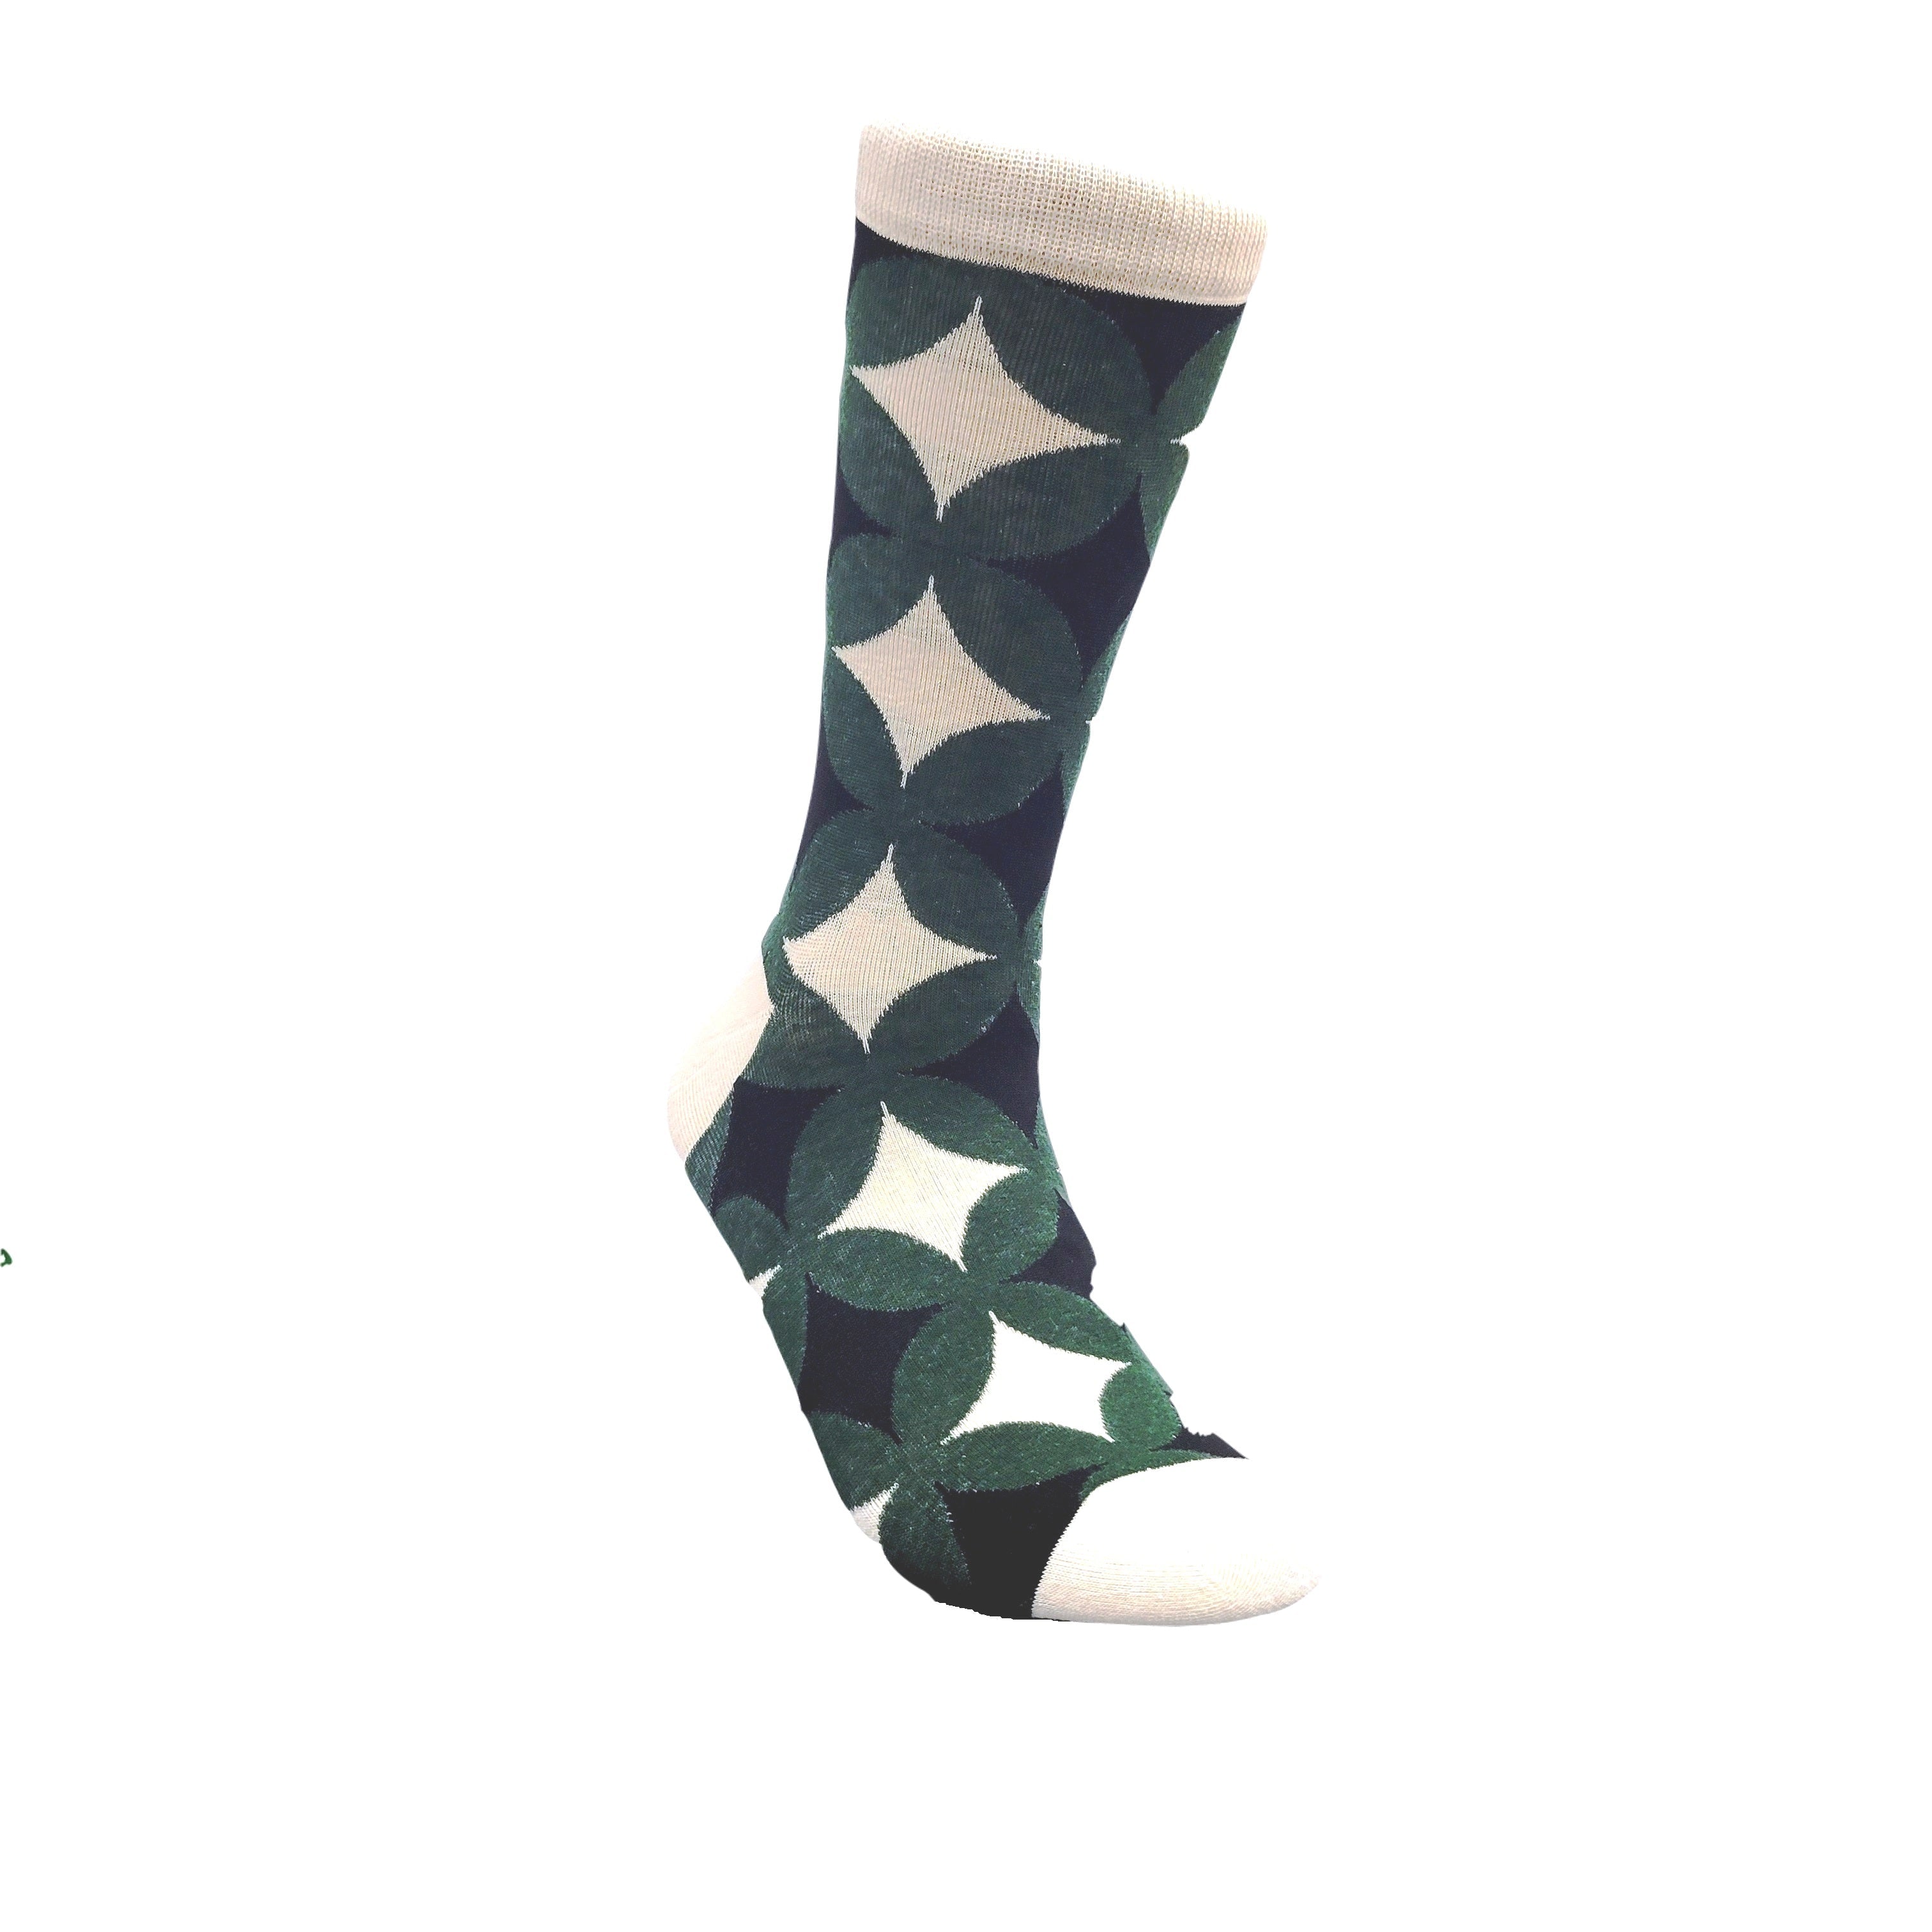 Green Avocado Colored Geometric Patterned Socks from the Sock Panda (Adult Large)